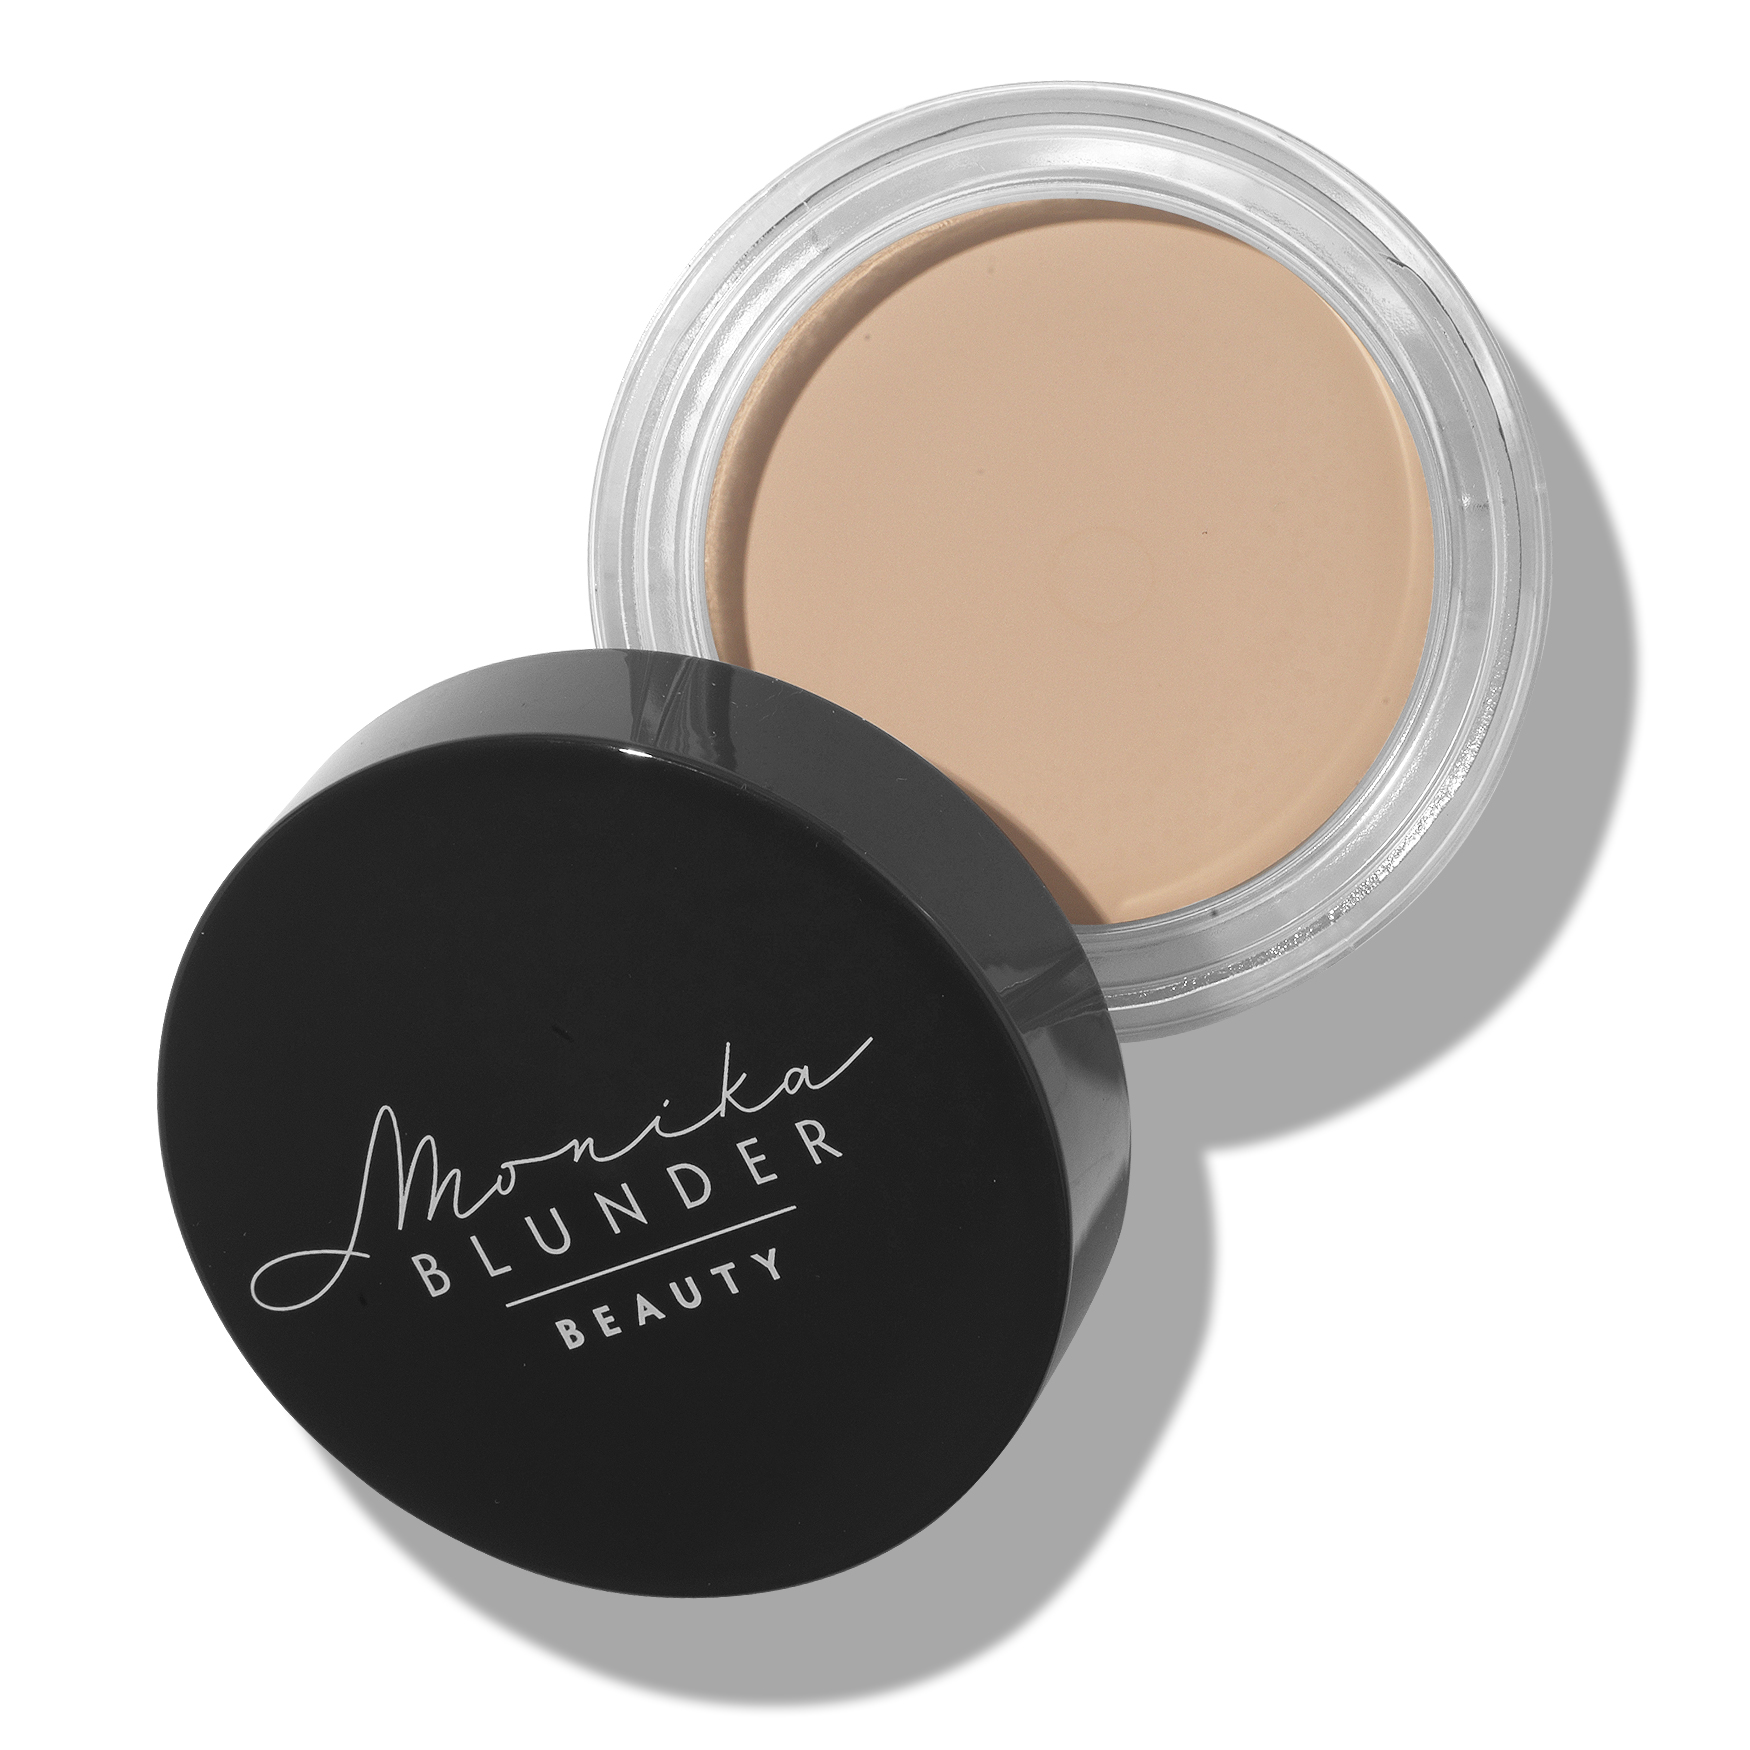 Monika Blunder Beauty Cover Foundation/Concealer | Space NK